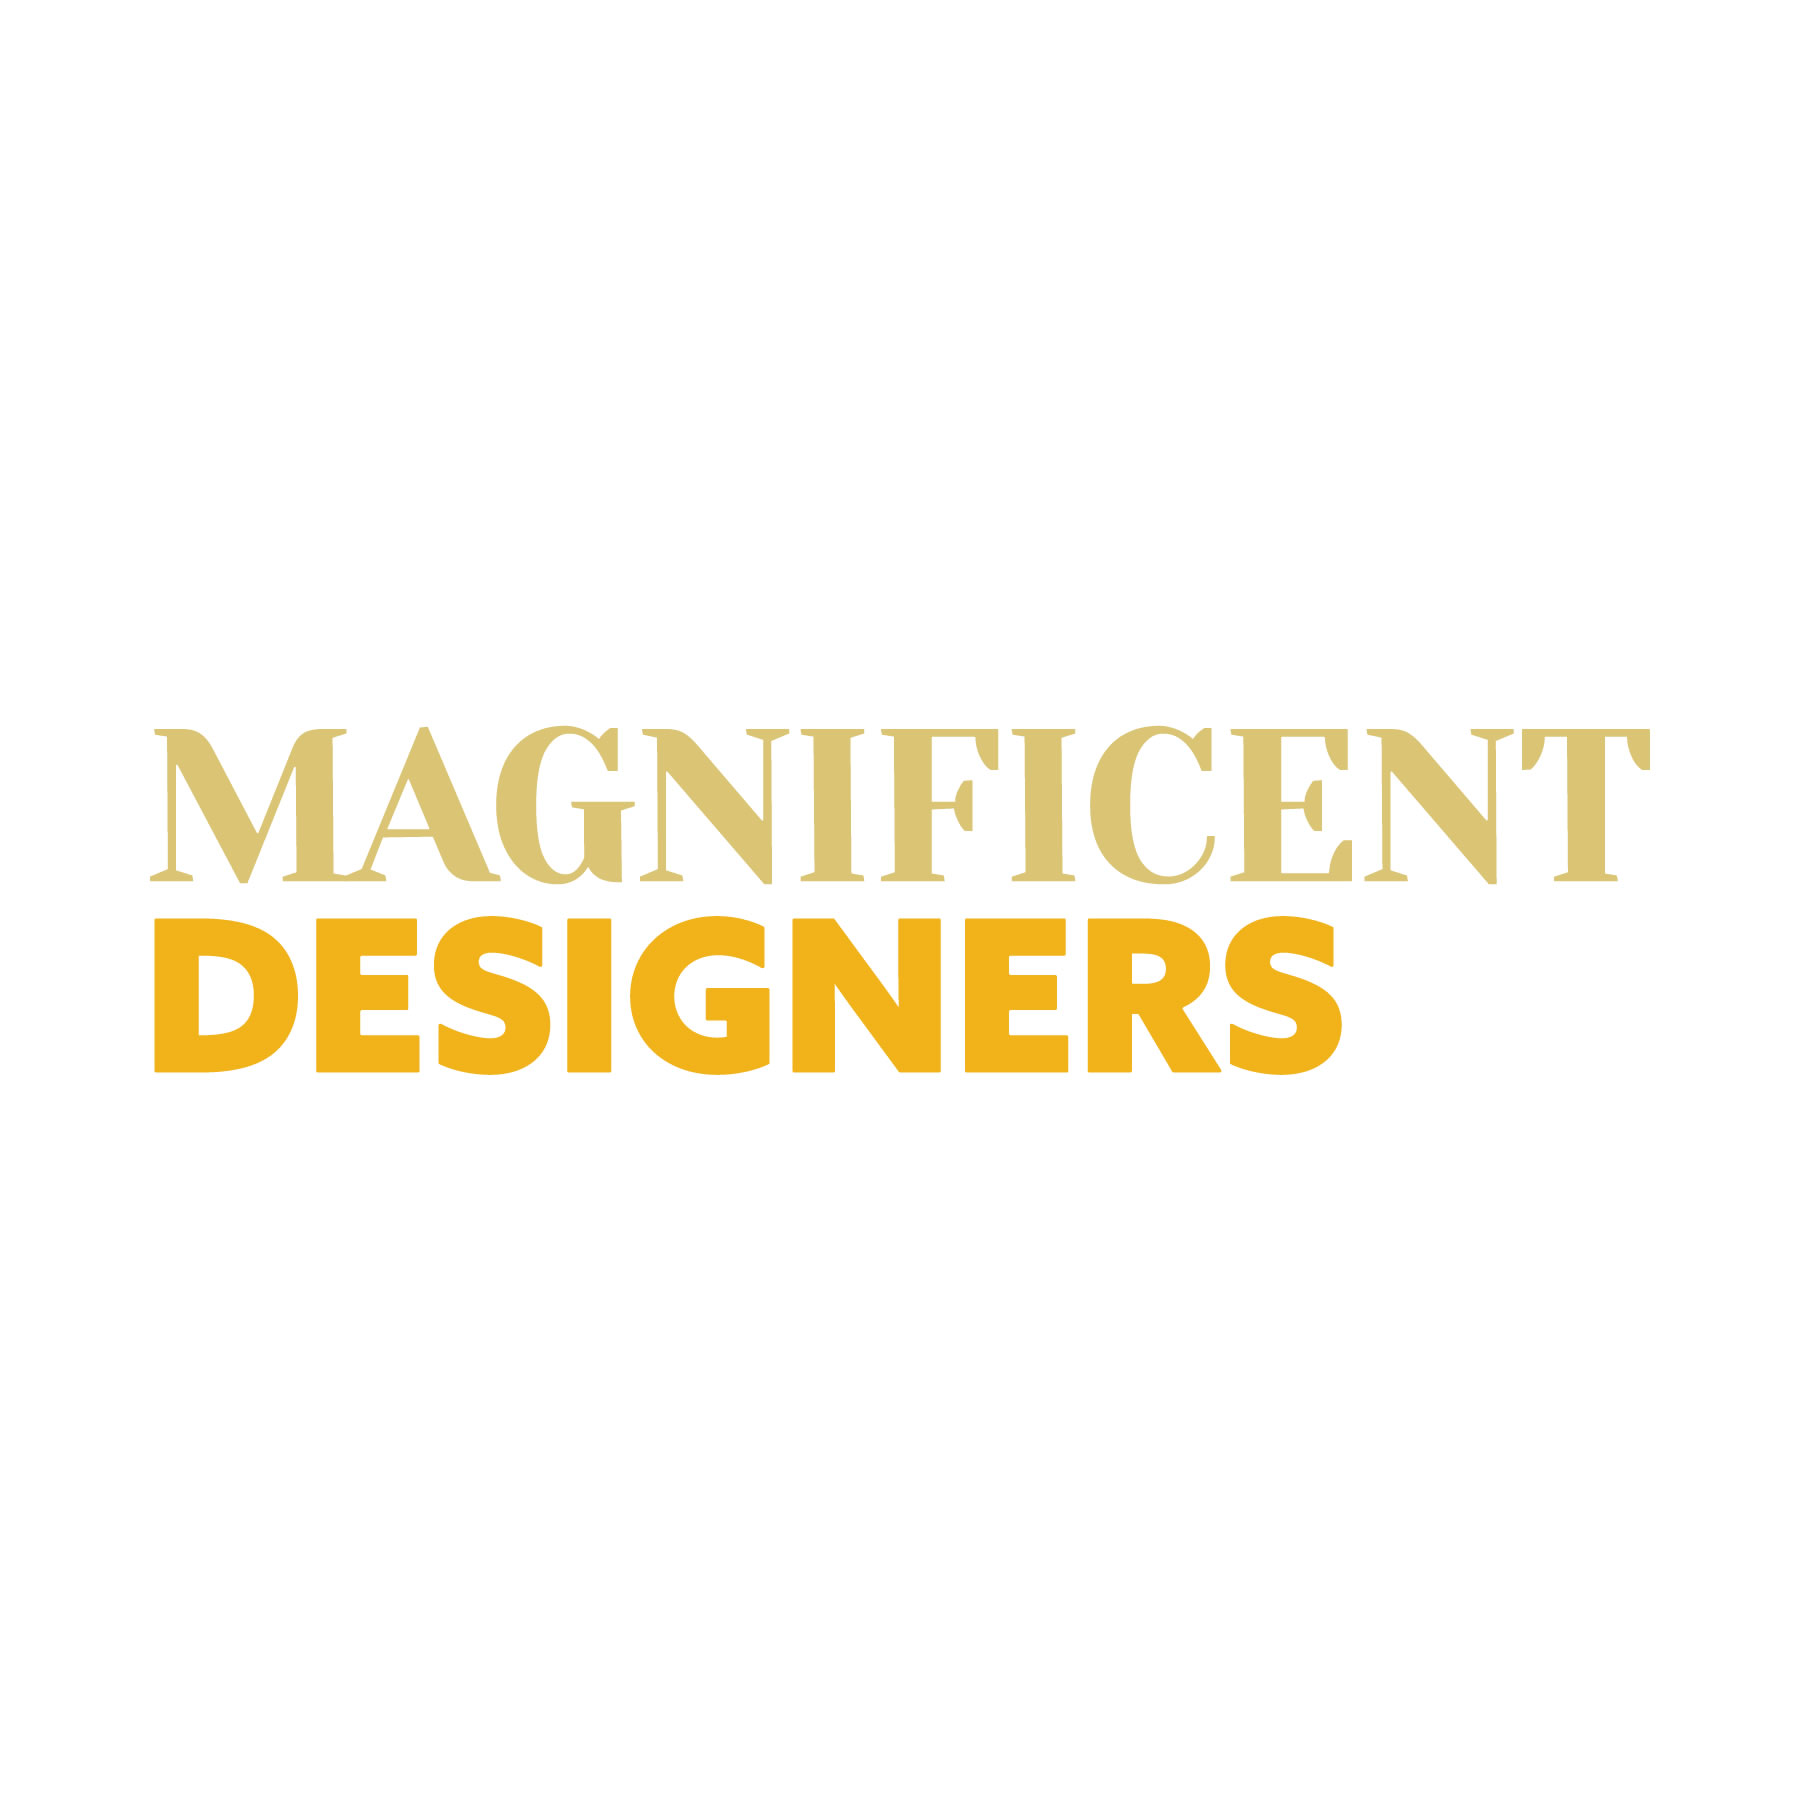 logo of the Magnificent Designers